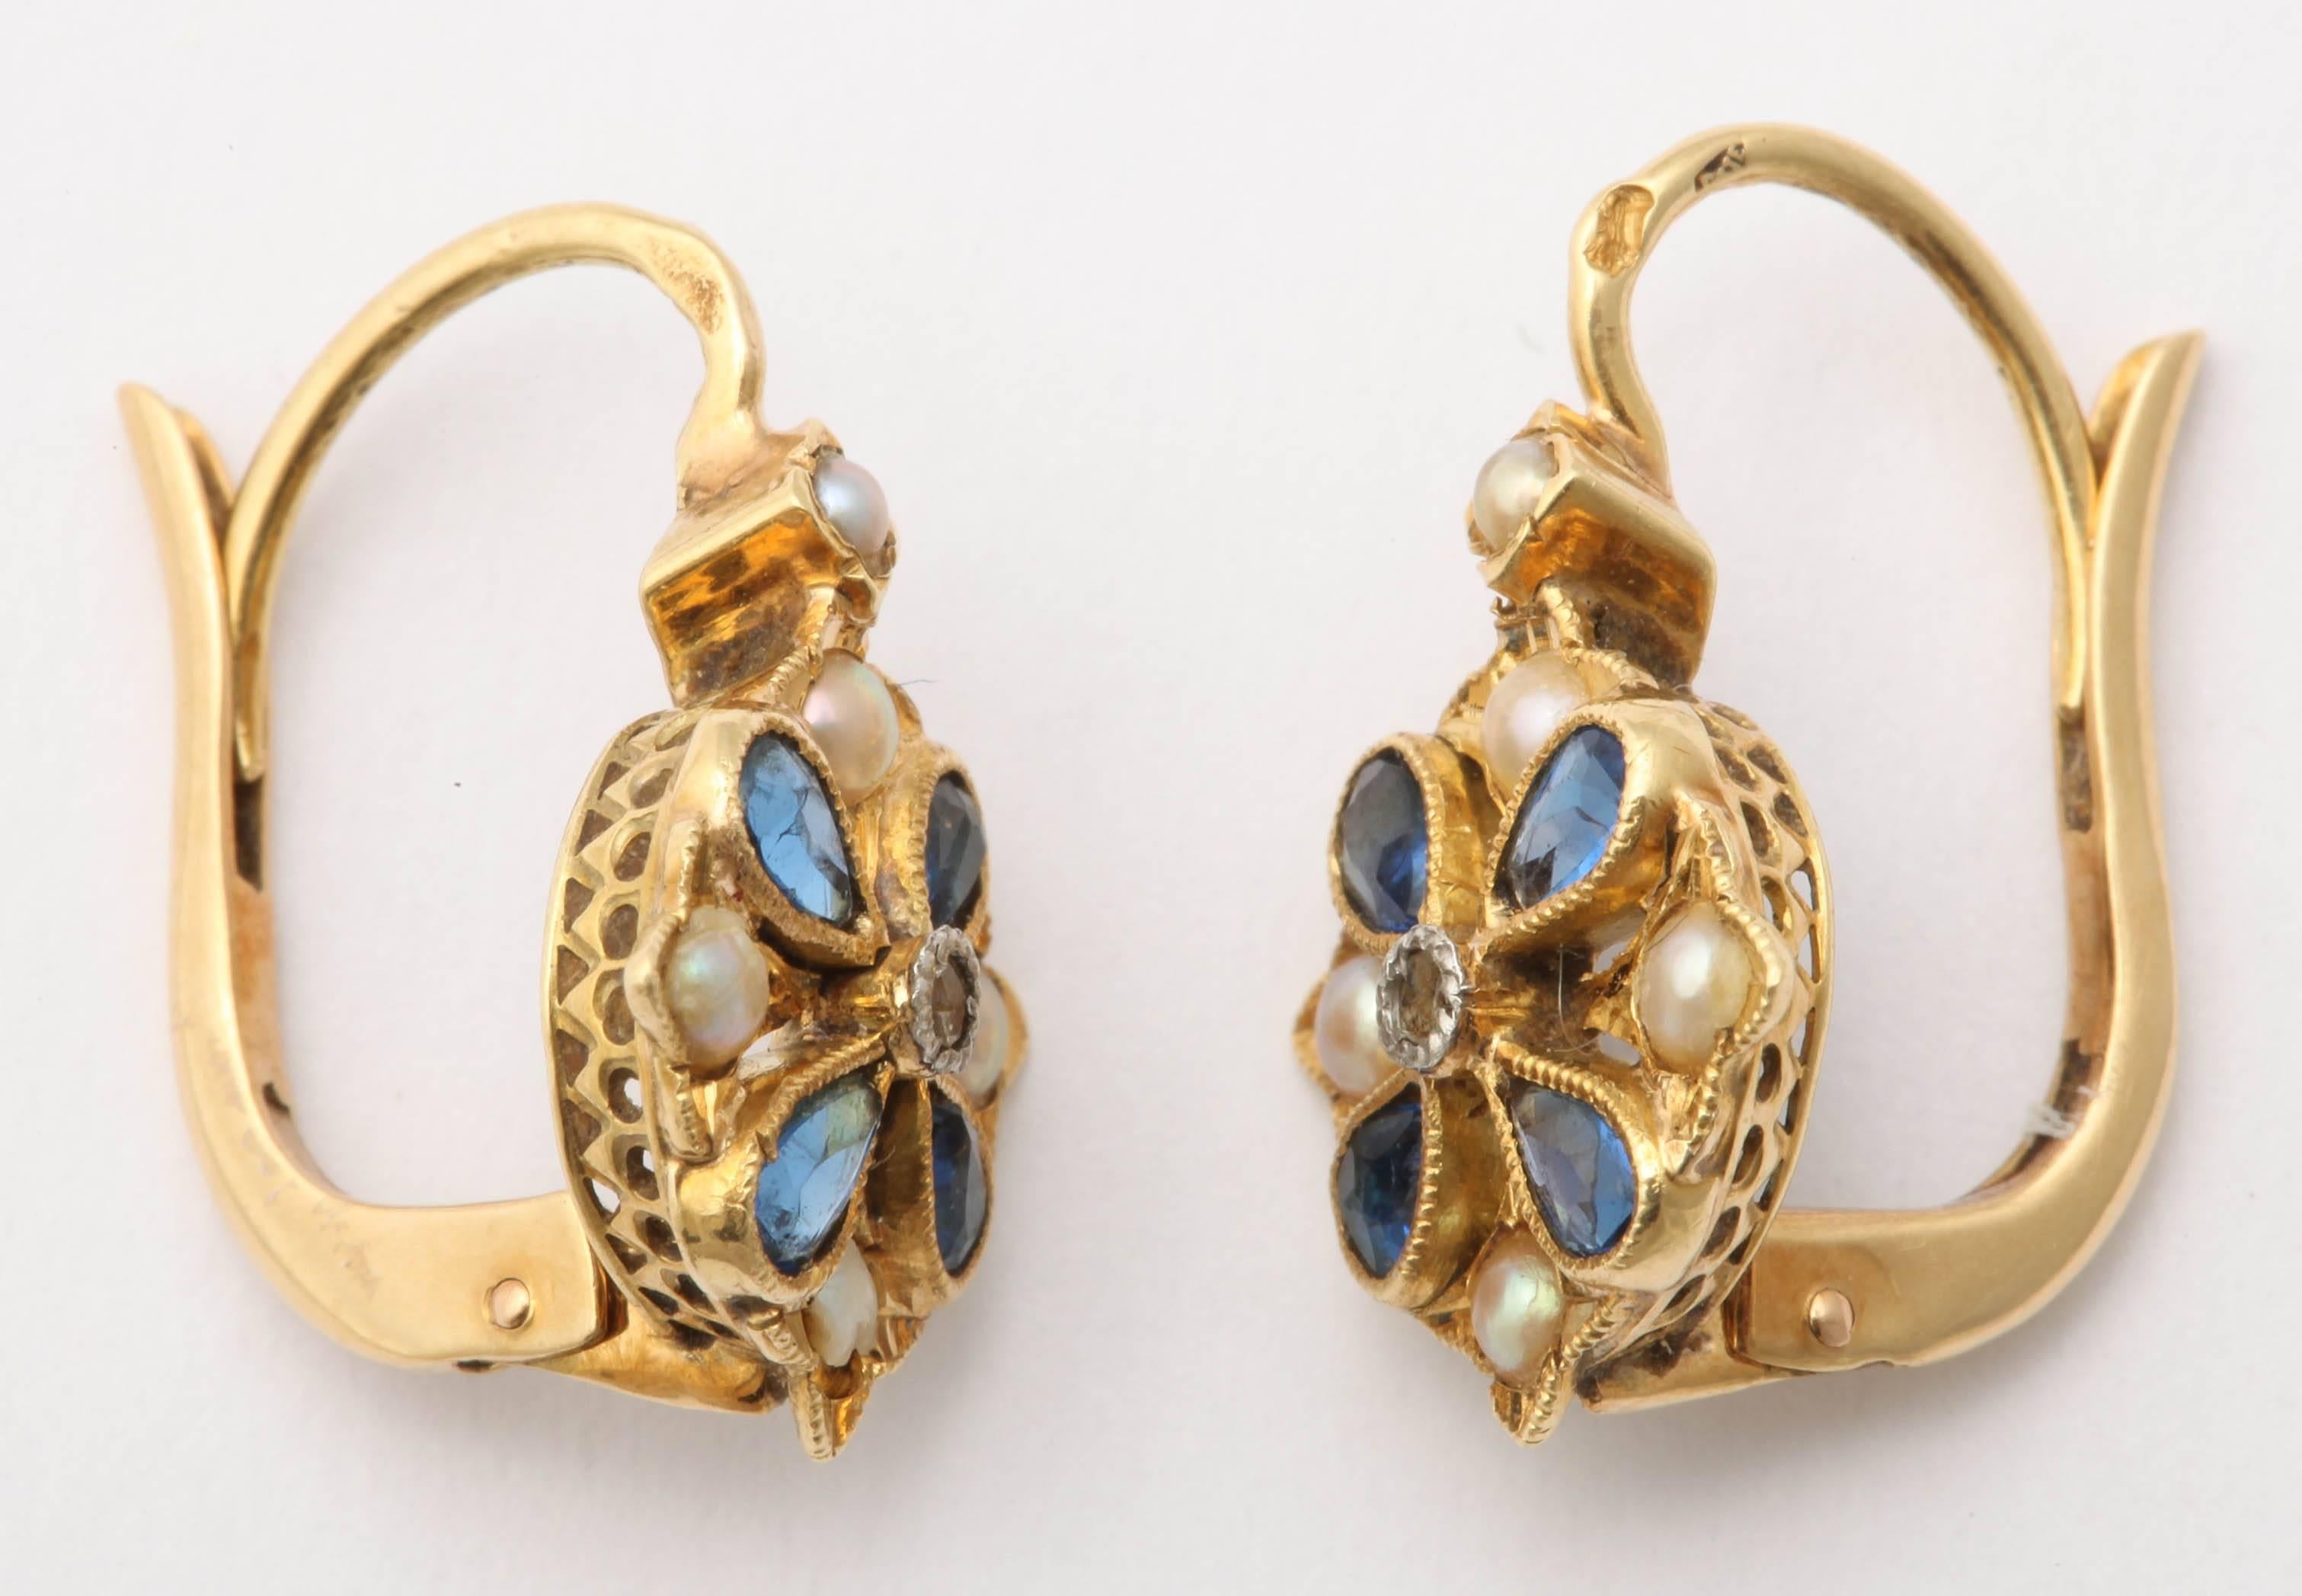 These sweet French earrings alternate marquise cut sapphires and seed pearls in a floral pattern around rose cut diamond centers. Set in 18K gold with lever backs.